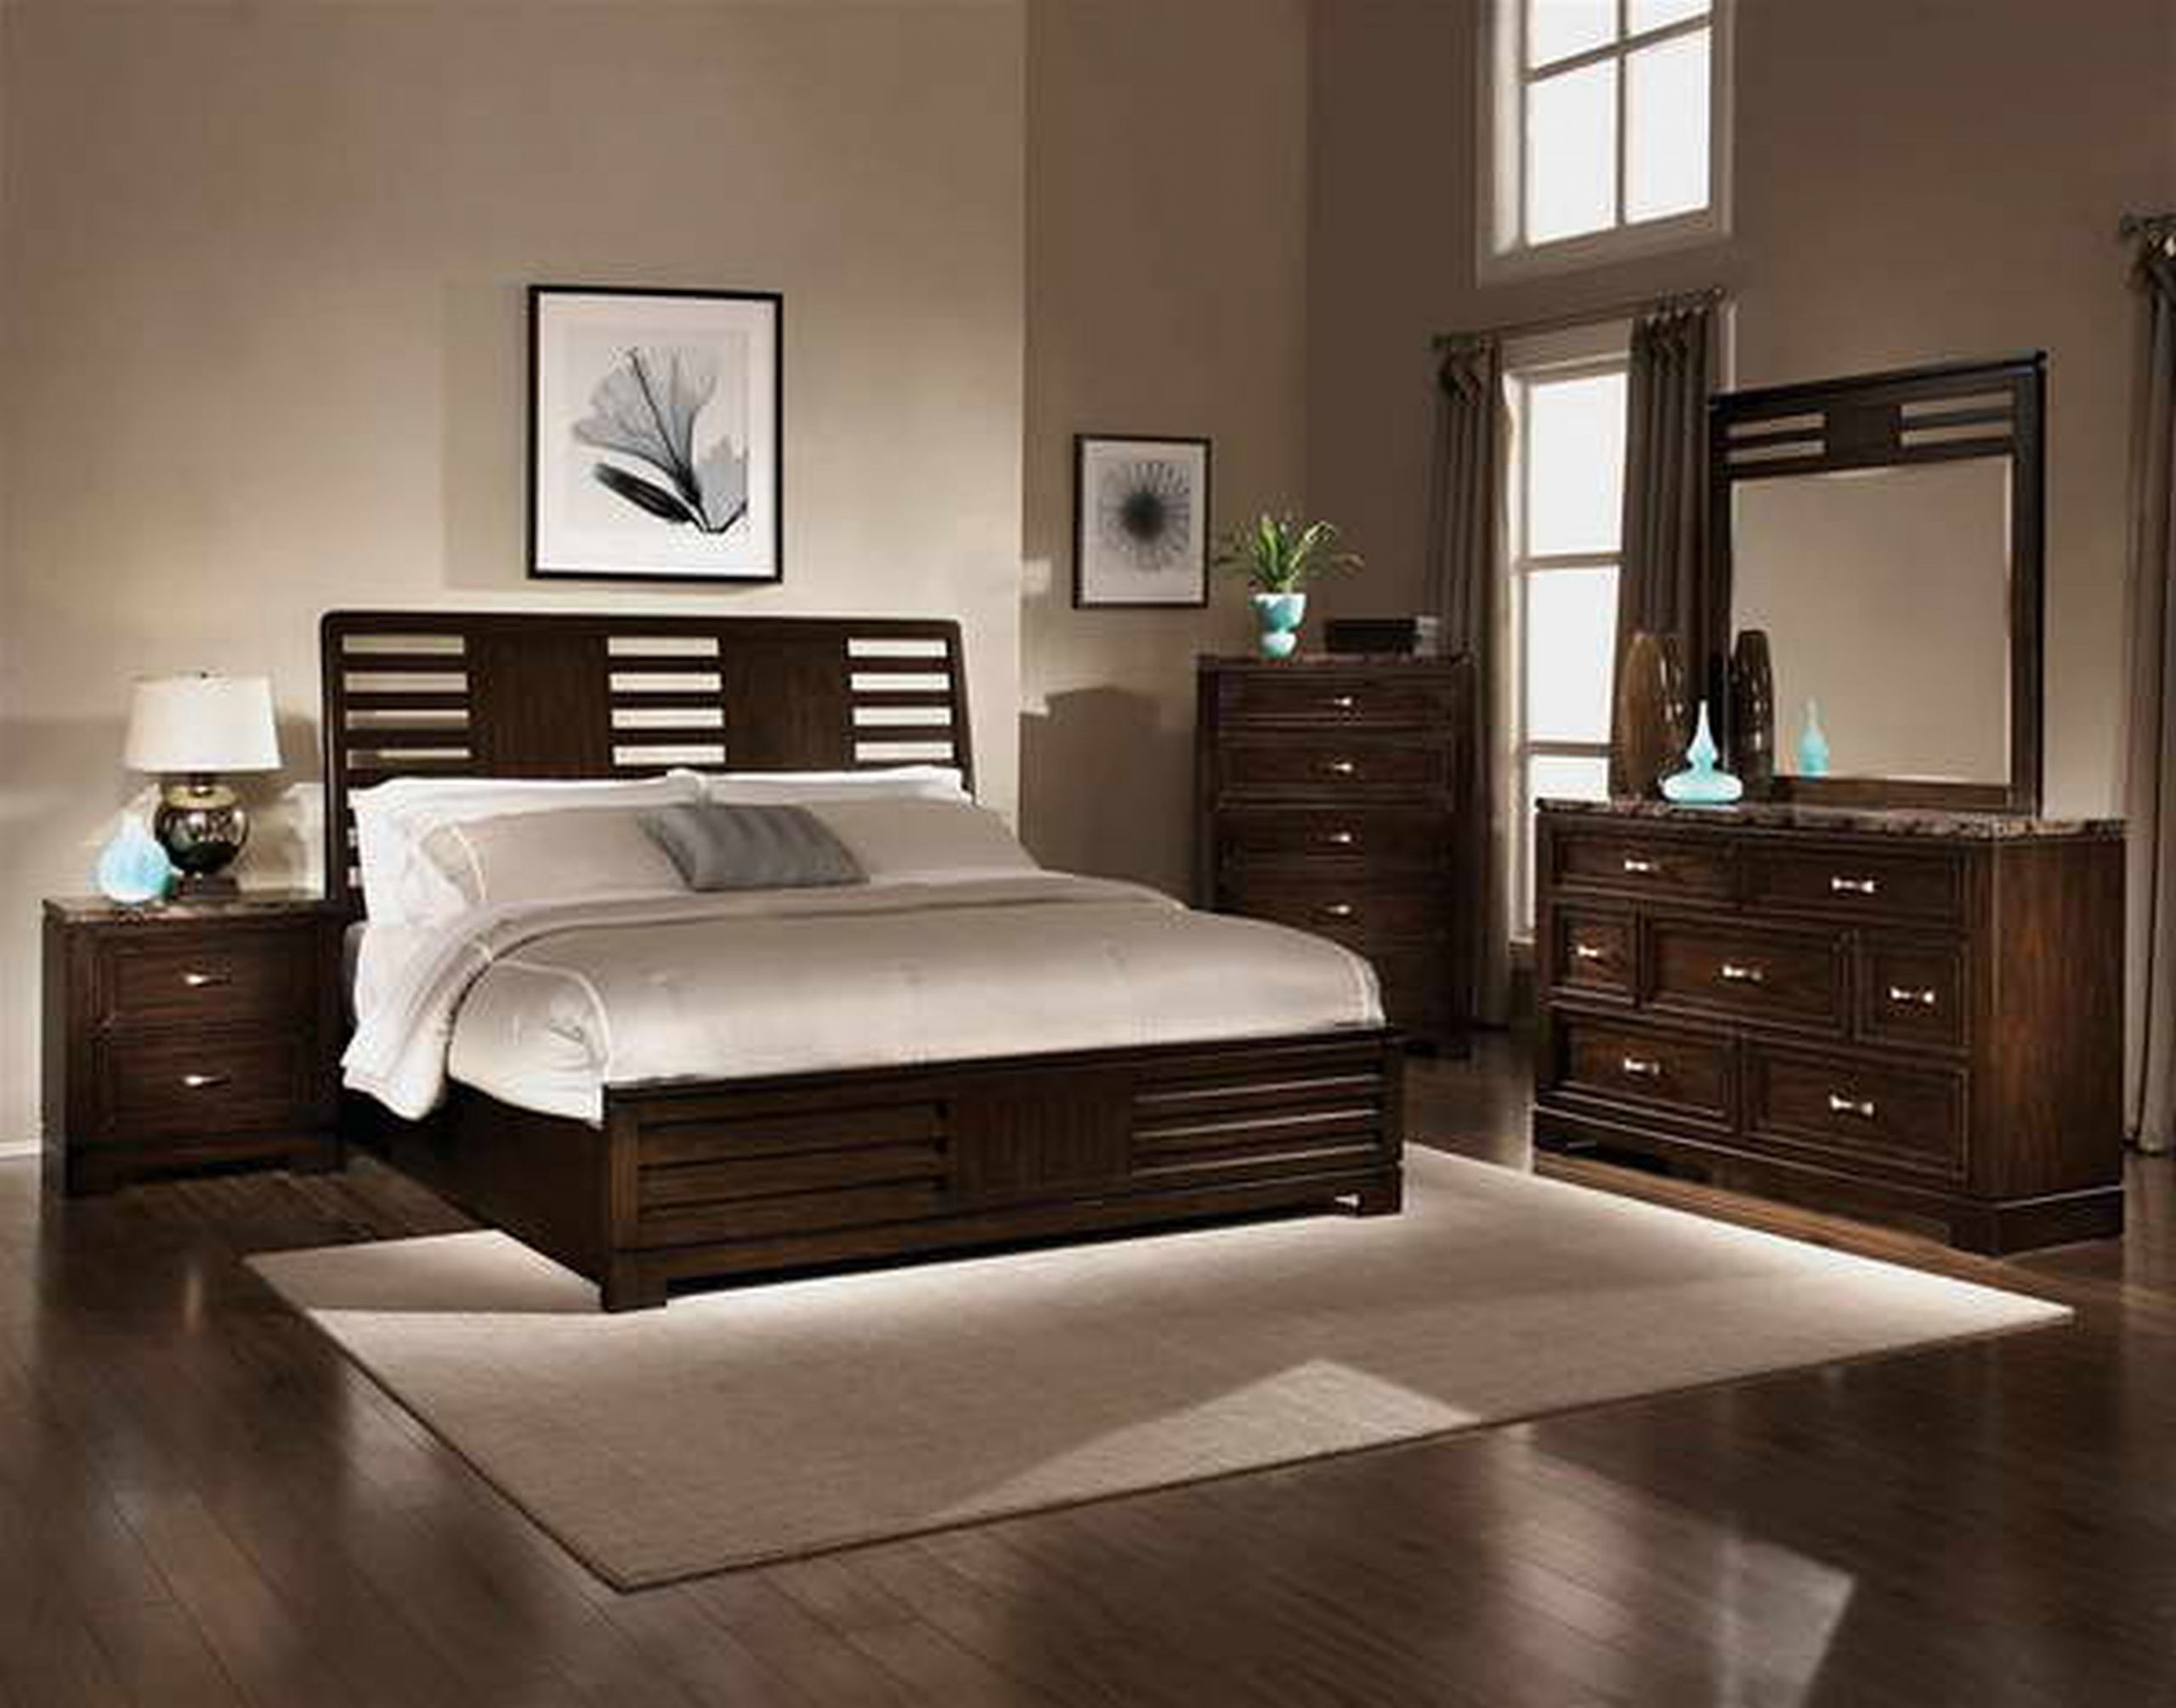 Brown Bedroom Walls
 Color binations For Bedrooms Say Goodbye To Your